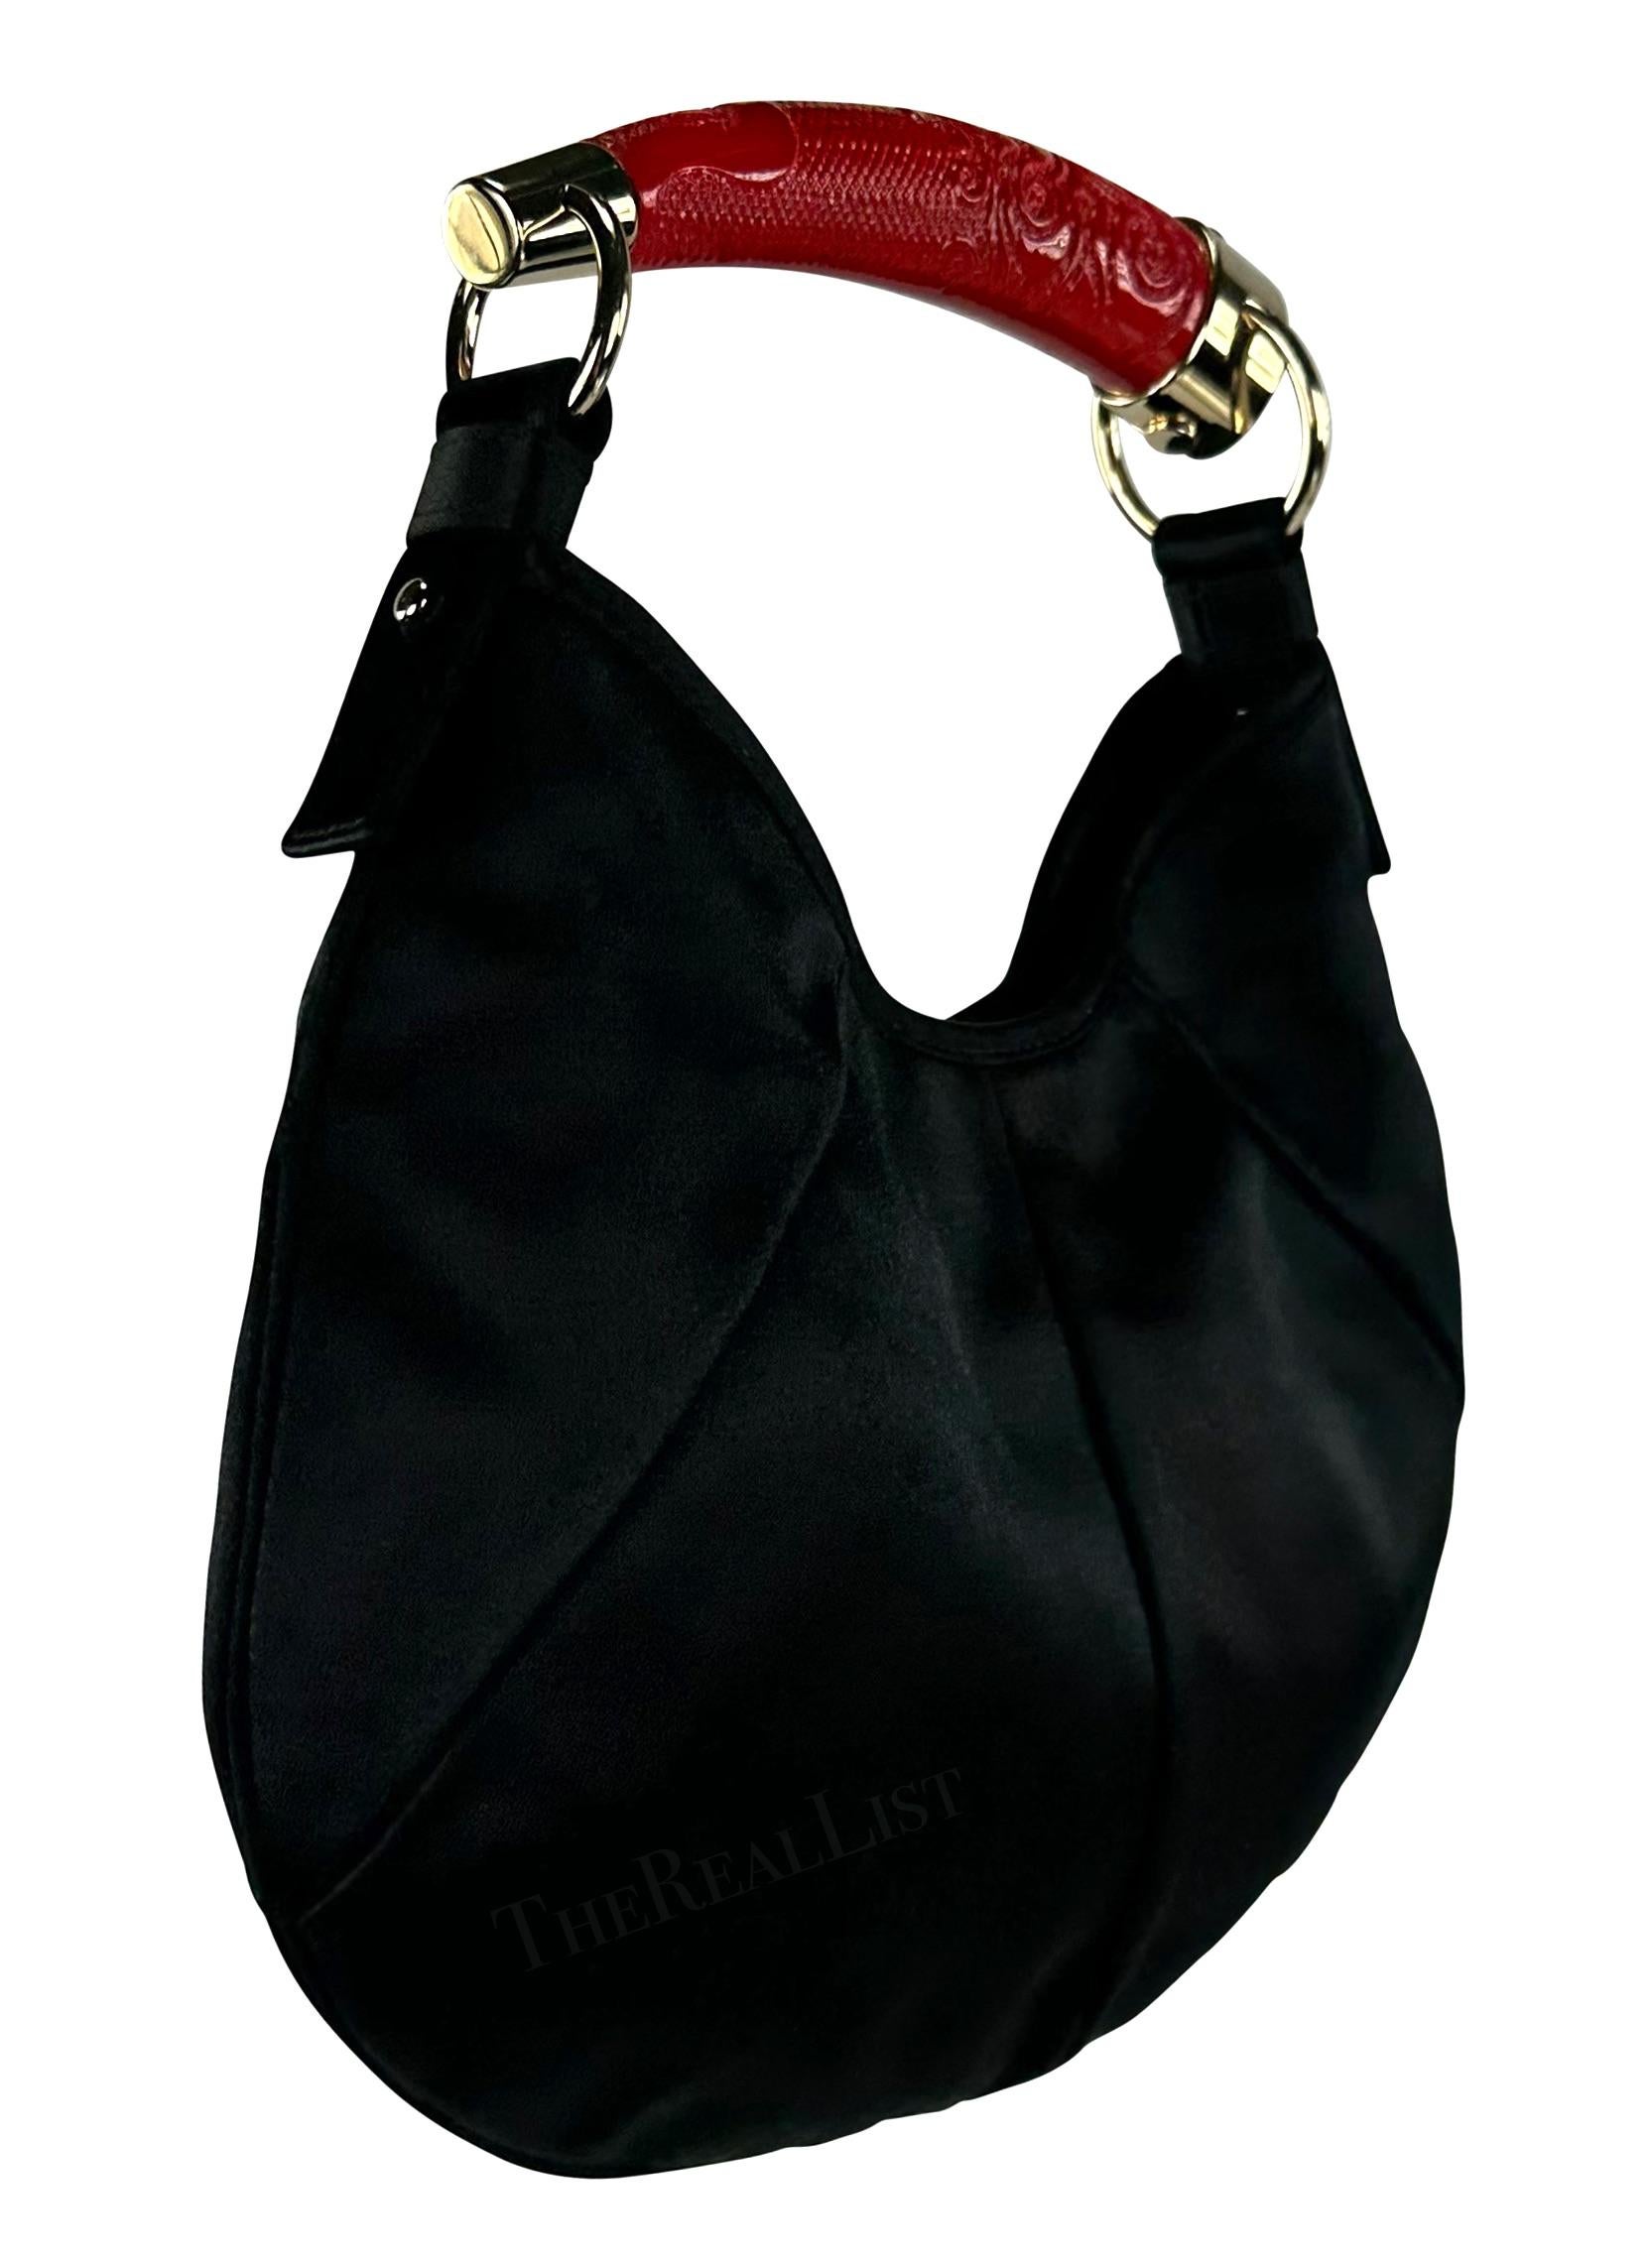 F/W 2004 Yves Saint Laurent by Tom Ford Black Satin Red Horn Mombasa Mini Bag In Excellent Condition For Sale In West Hollywood, CA